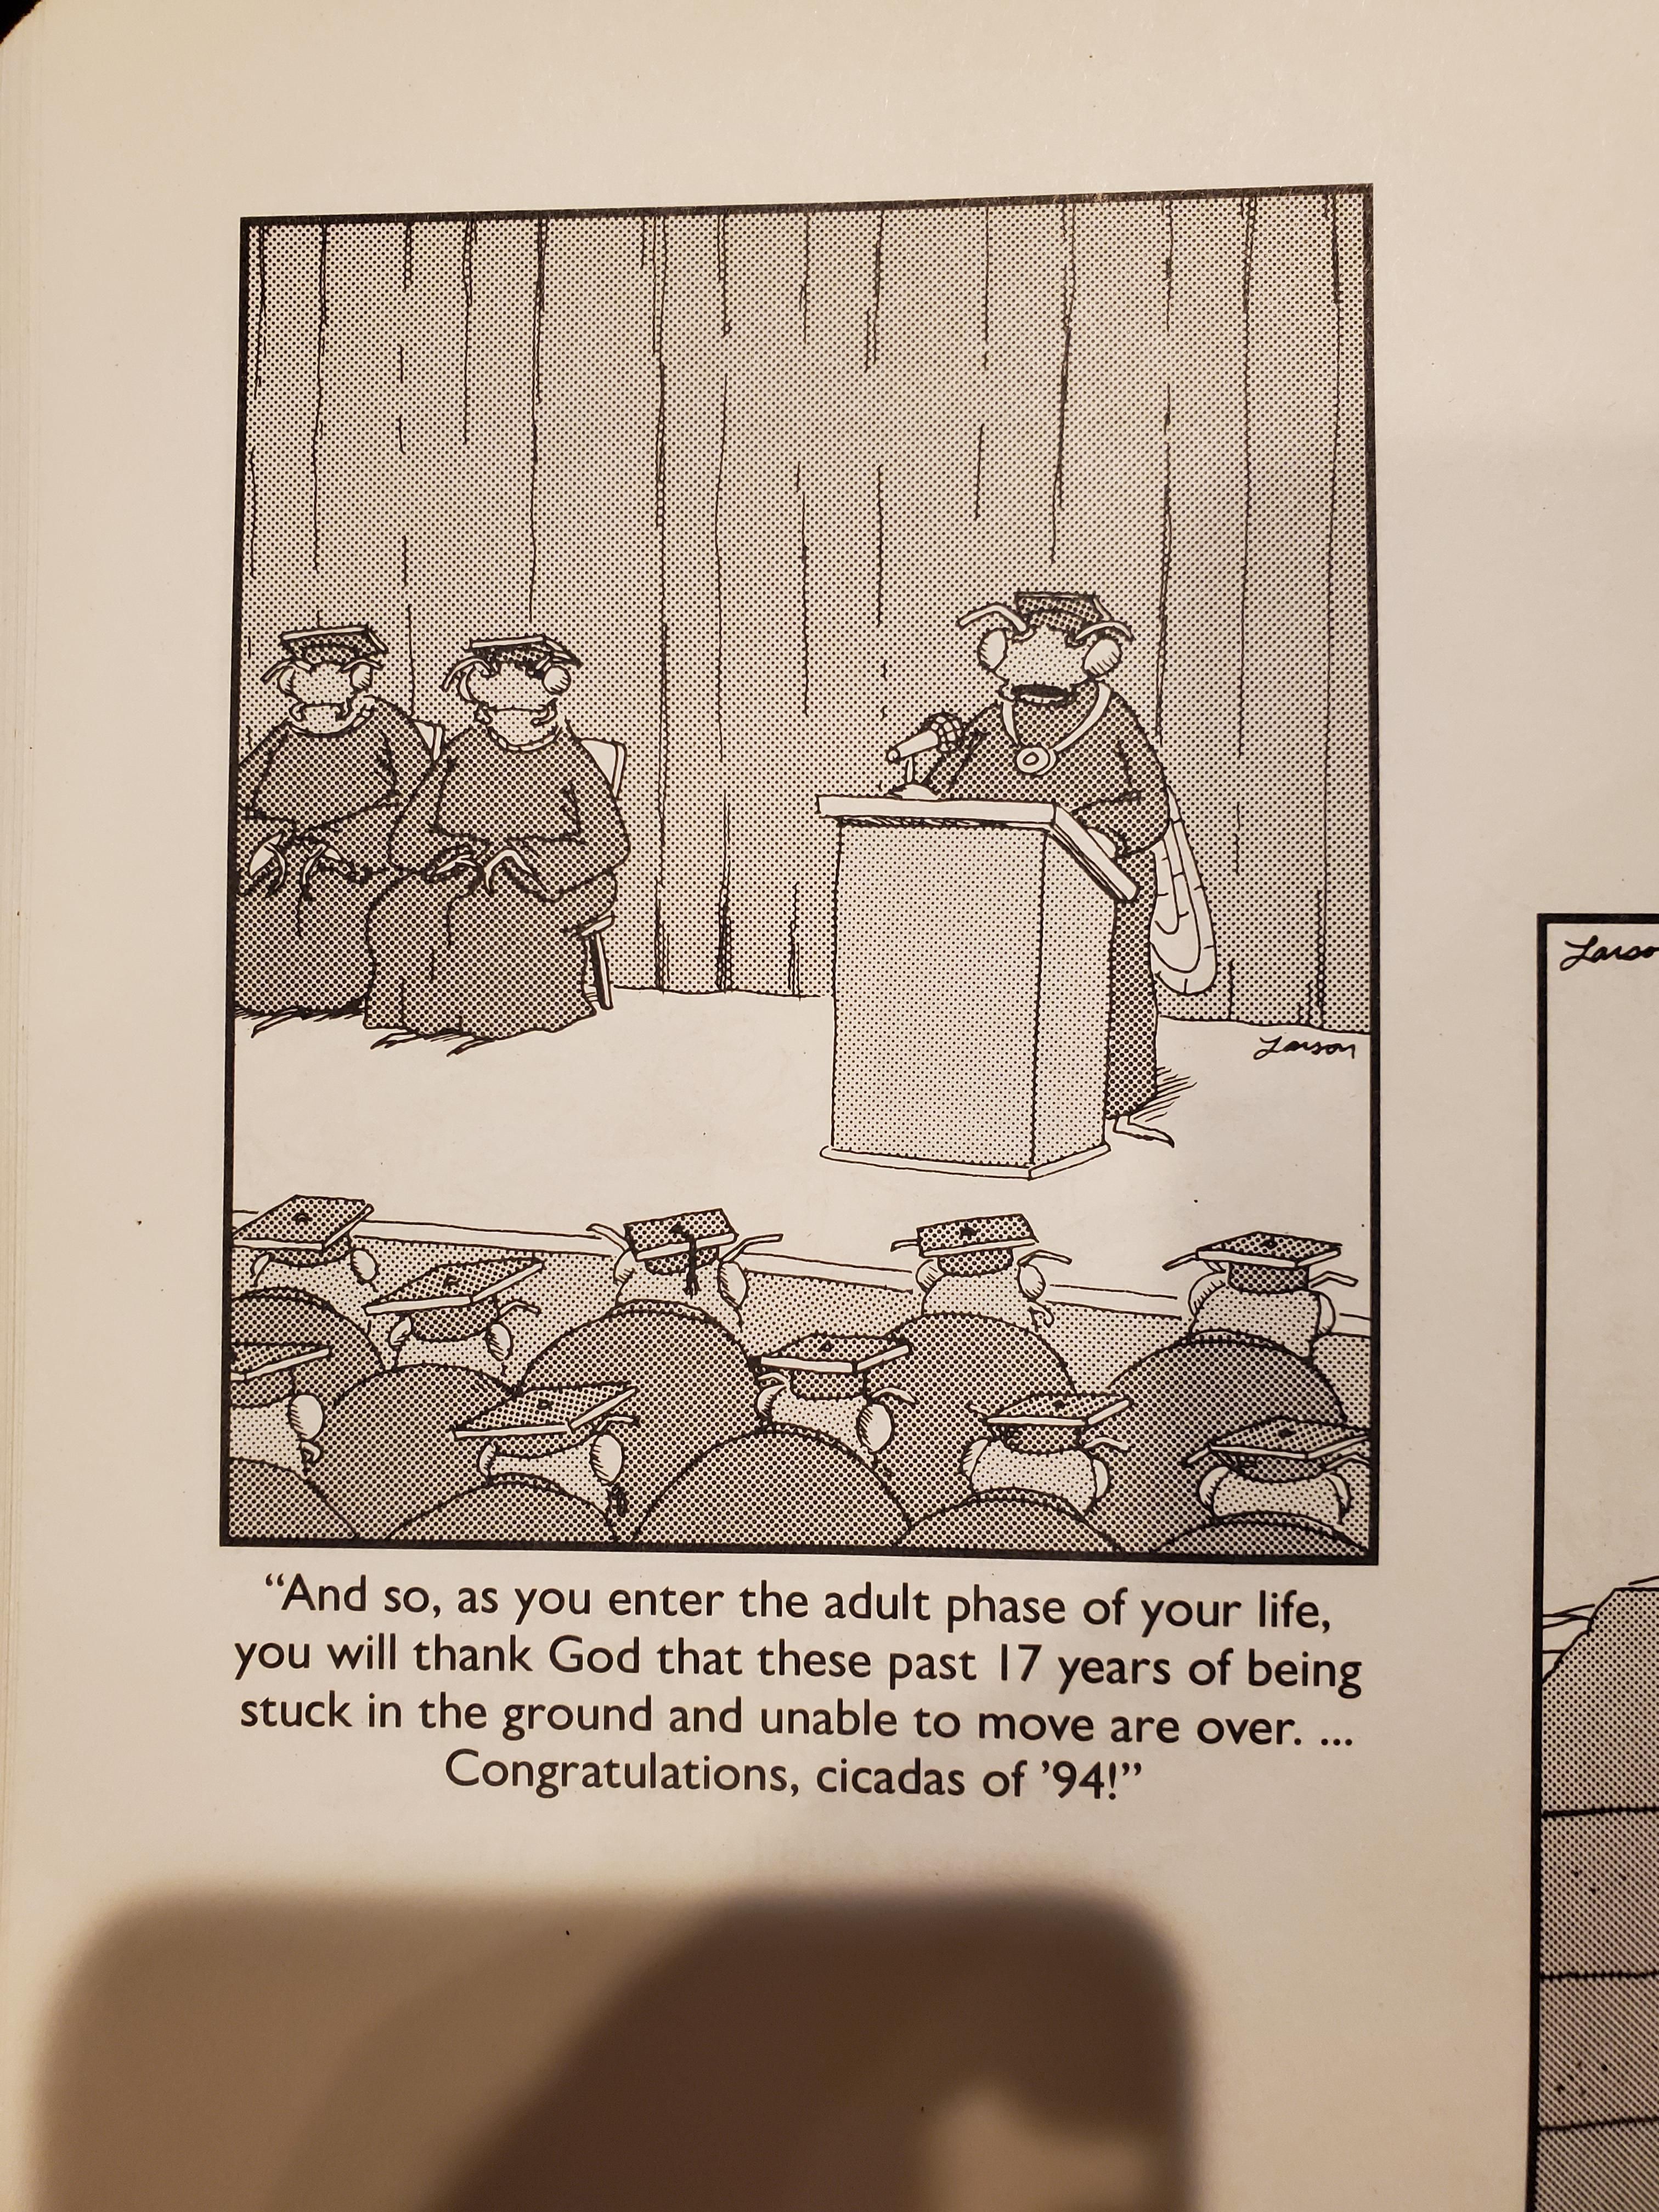 A Far Side bit for all the east coasters